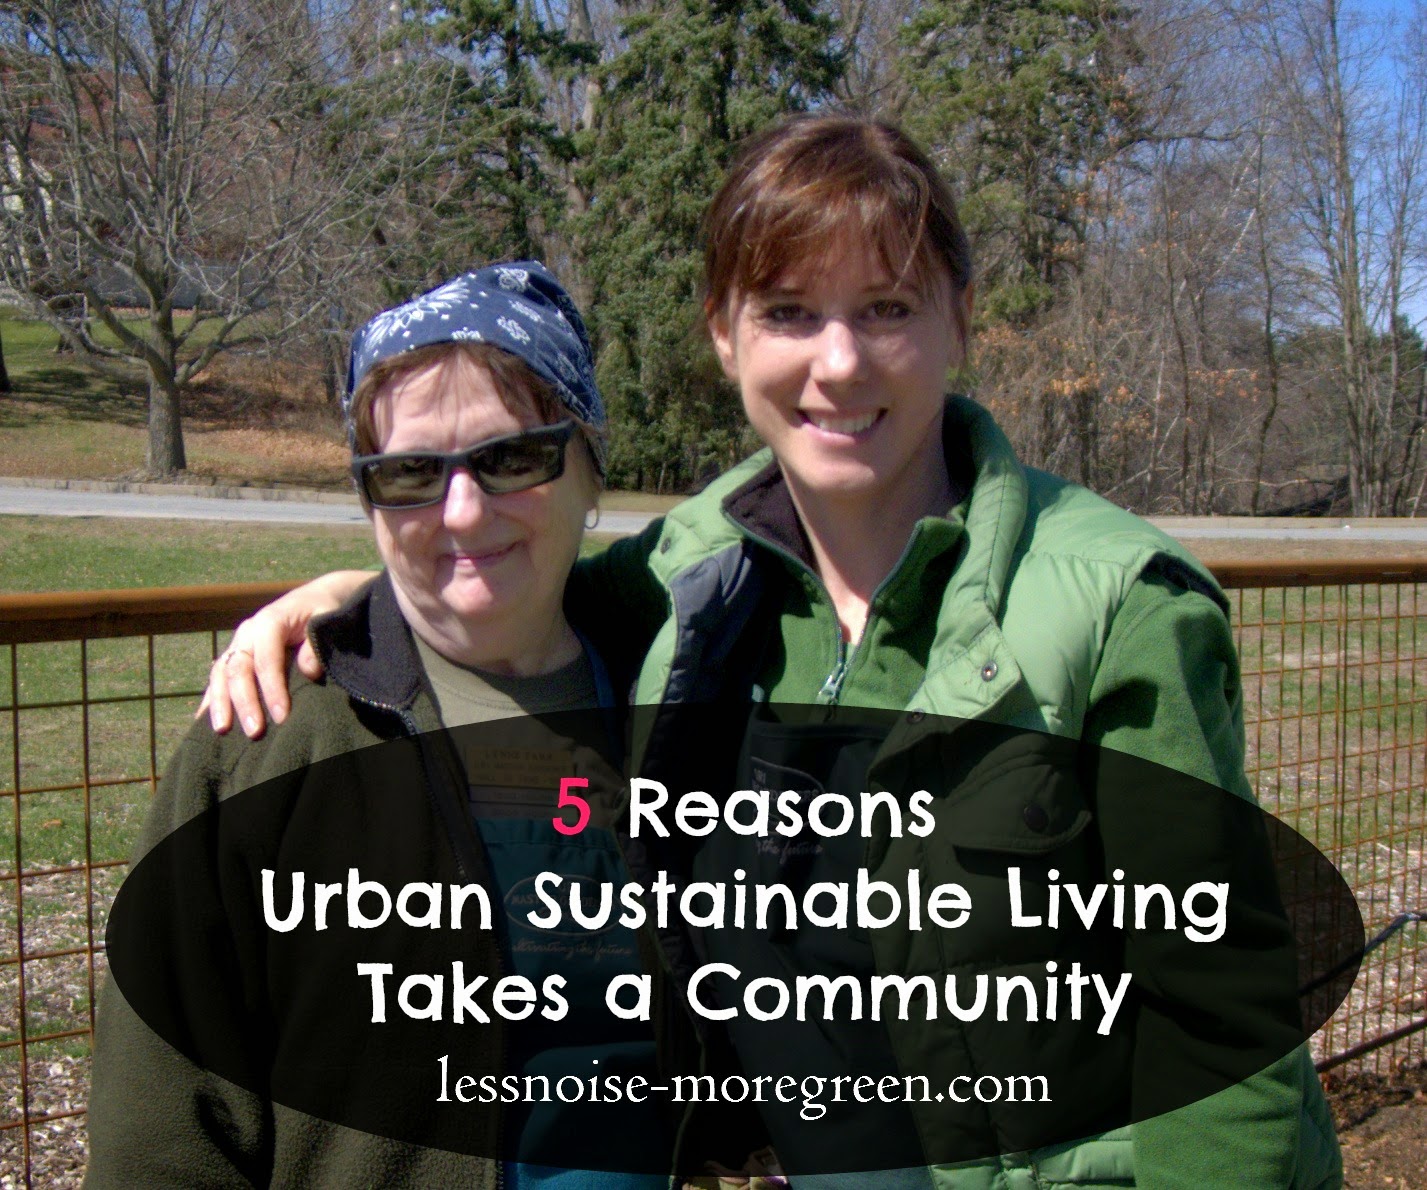 Five reasons urban sustainable living takes a community